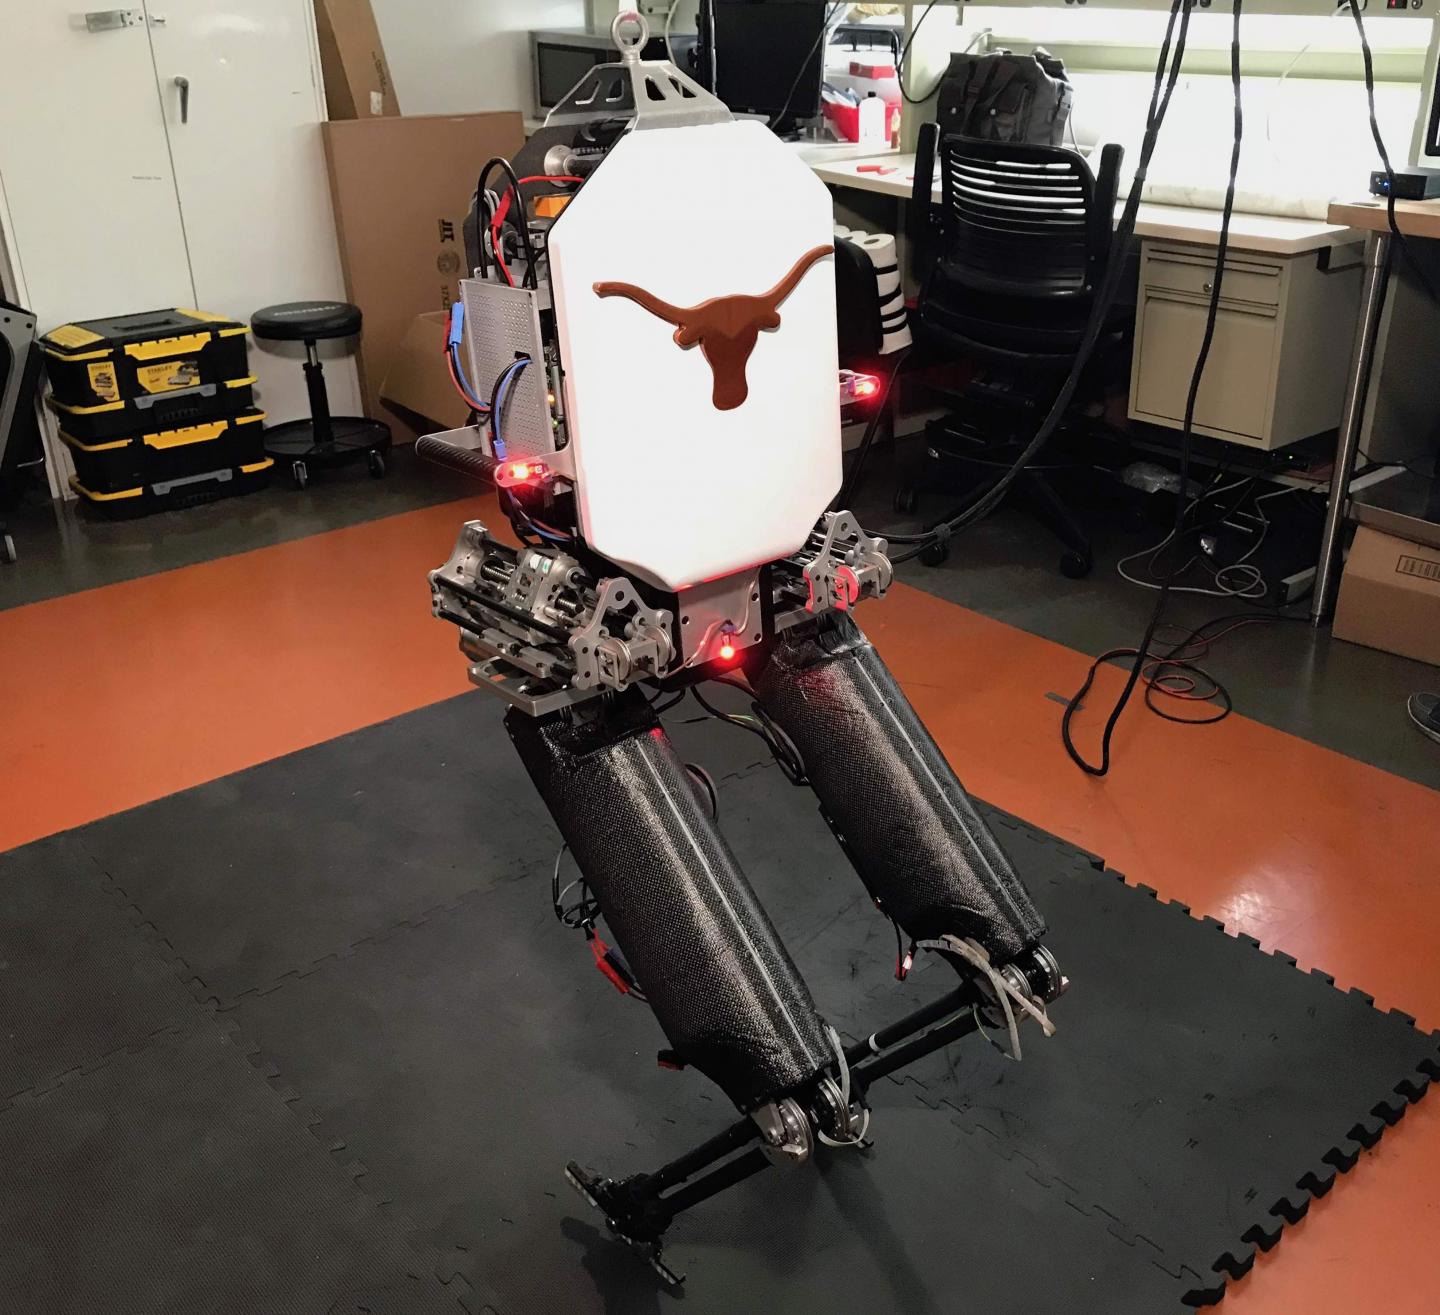 Robotics experts at the Cockrell School of Engineering developed a mathematical equation to achieve human-like balance in this biped robot, called Mercury. (Source: Cockrell School of Engineering, The University of Texas at Austin)